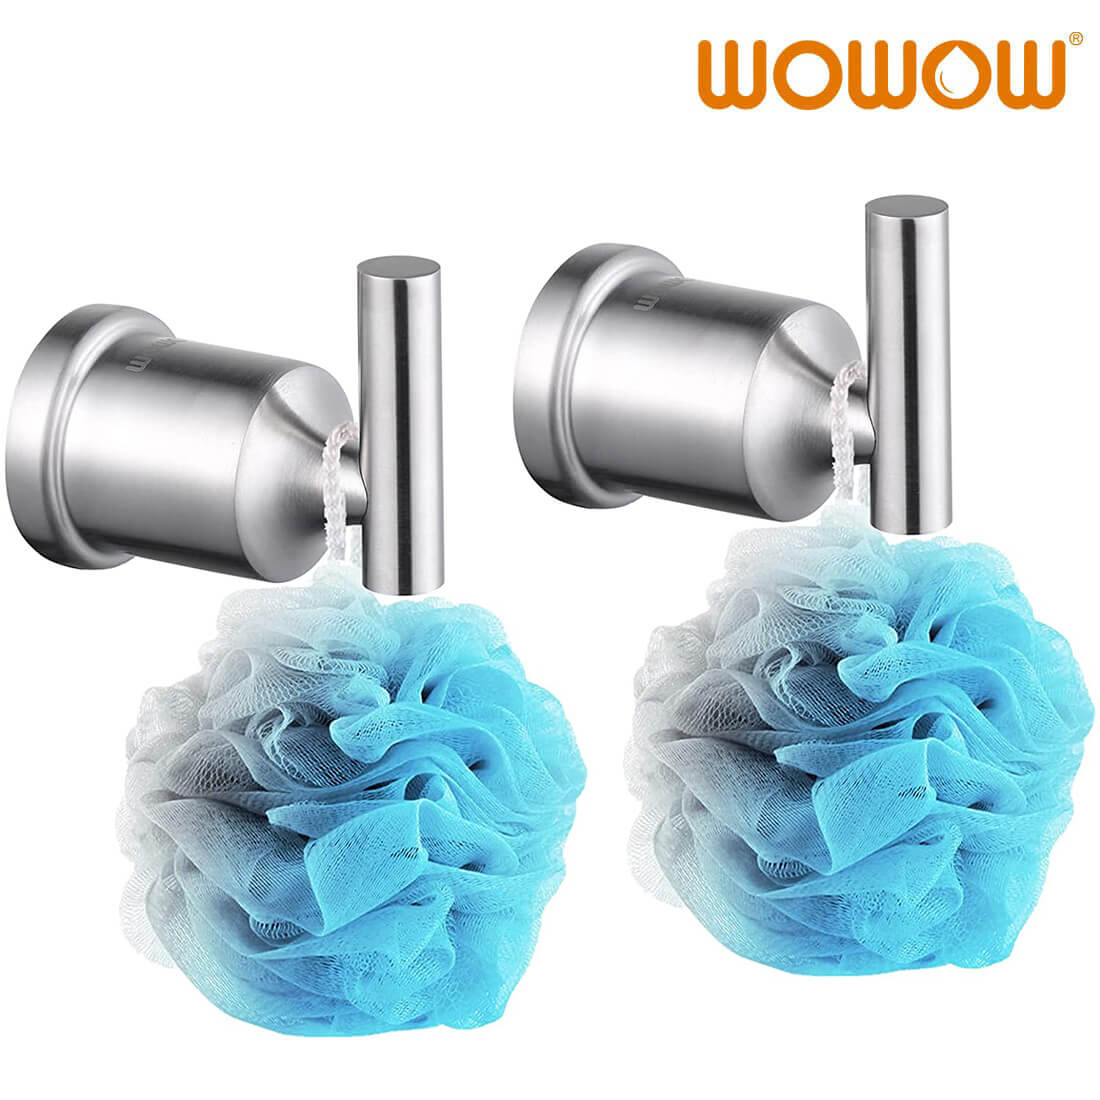 wowow brushed nickel wall mounted towel hooks